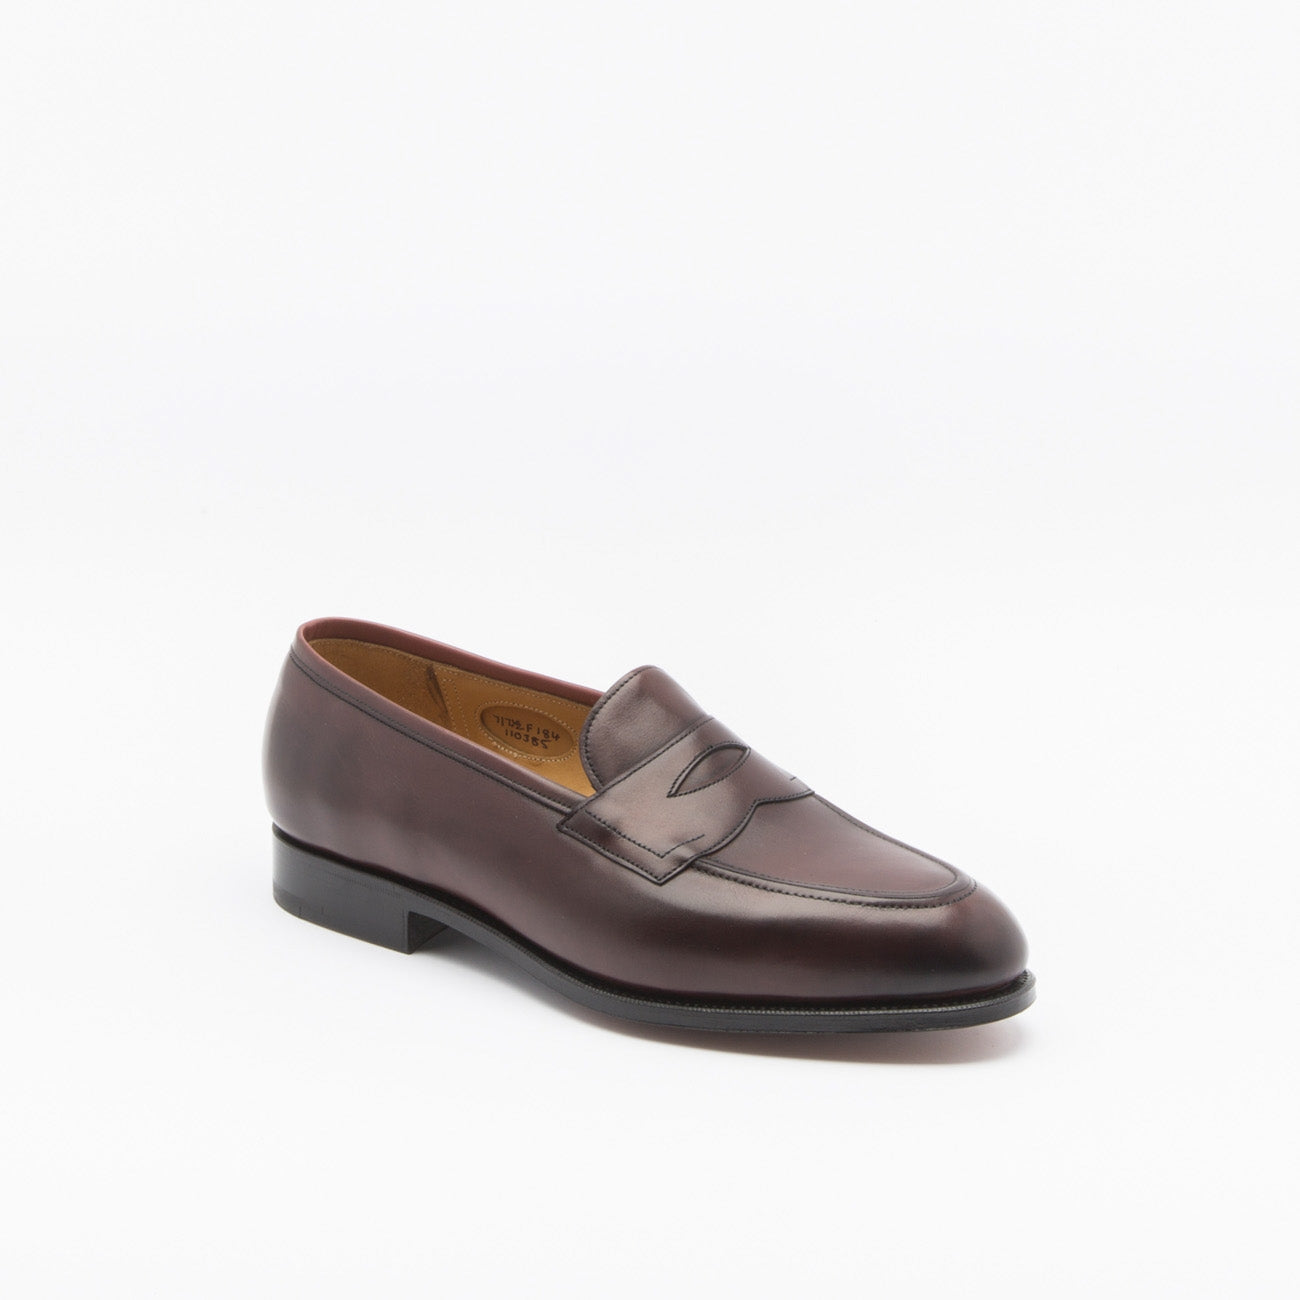 Mocassino penny loafer Edward Green Piccadilly in pelle bordeaux